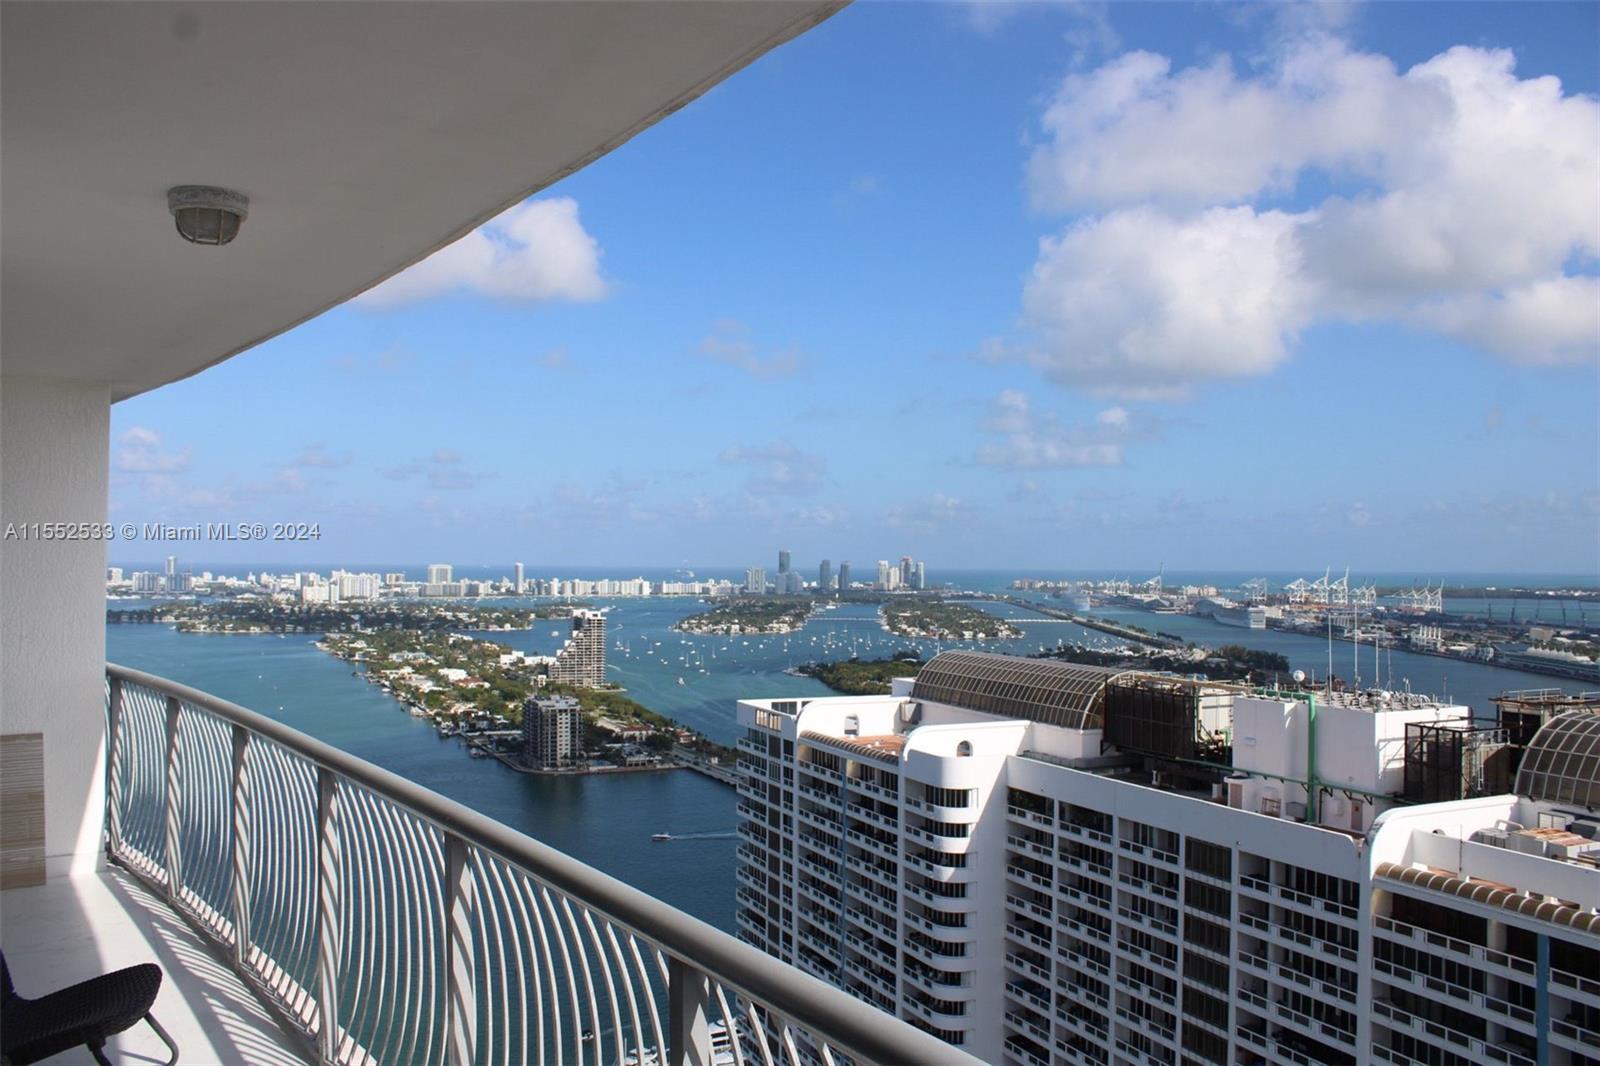 Prime location for Miami City Lifestyle! Stunningly upgraded one-bedroom condo offering breathtaking views of both Biscayne Bay and the vibrant downtown cityscape. Ideally situated in the heart of the thriving art and entertainment district. Just a few blocks from Adrienne Arsht Center for the Performing Arts, Kaseya Center and world-class museums. Prime location right across from the renowned Margaret Pace Park, a popular gathering spot. Conveniently located close to metro rail. Close proximity to the vibrant neighborhoods of Wynwood, Downtown, and the Design District. The dynamic energy of these neighboring districts promises endless entertainment options and an enriching urban lifestyle. easy to show. Cable & Internet Included.